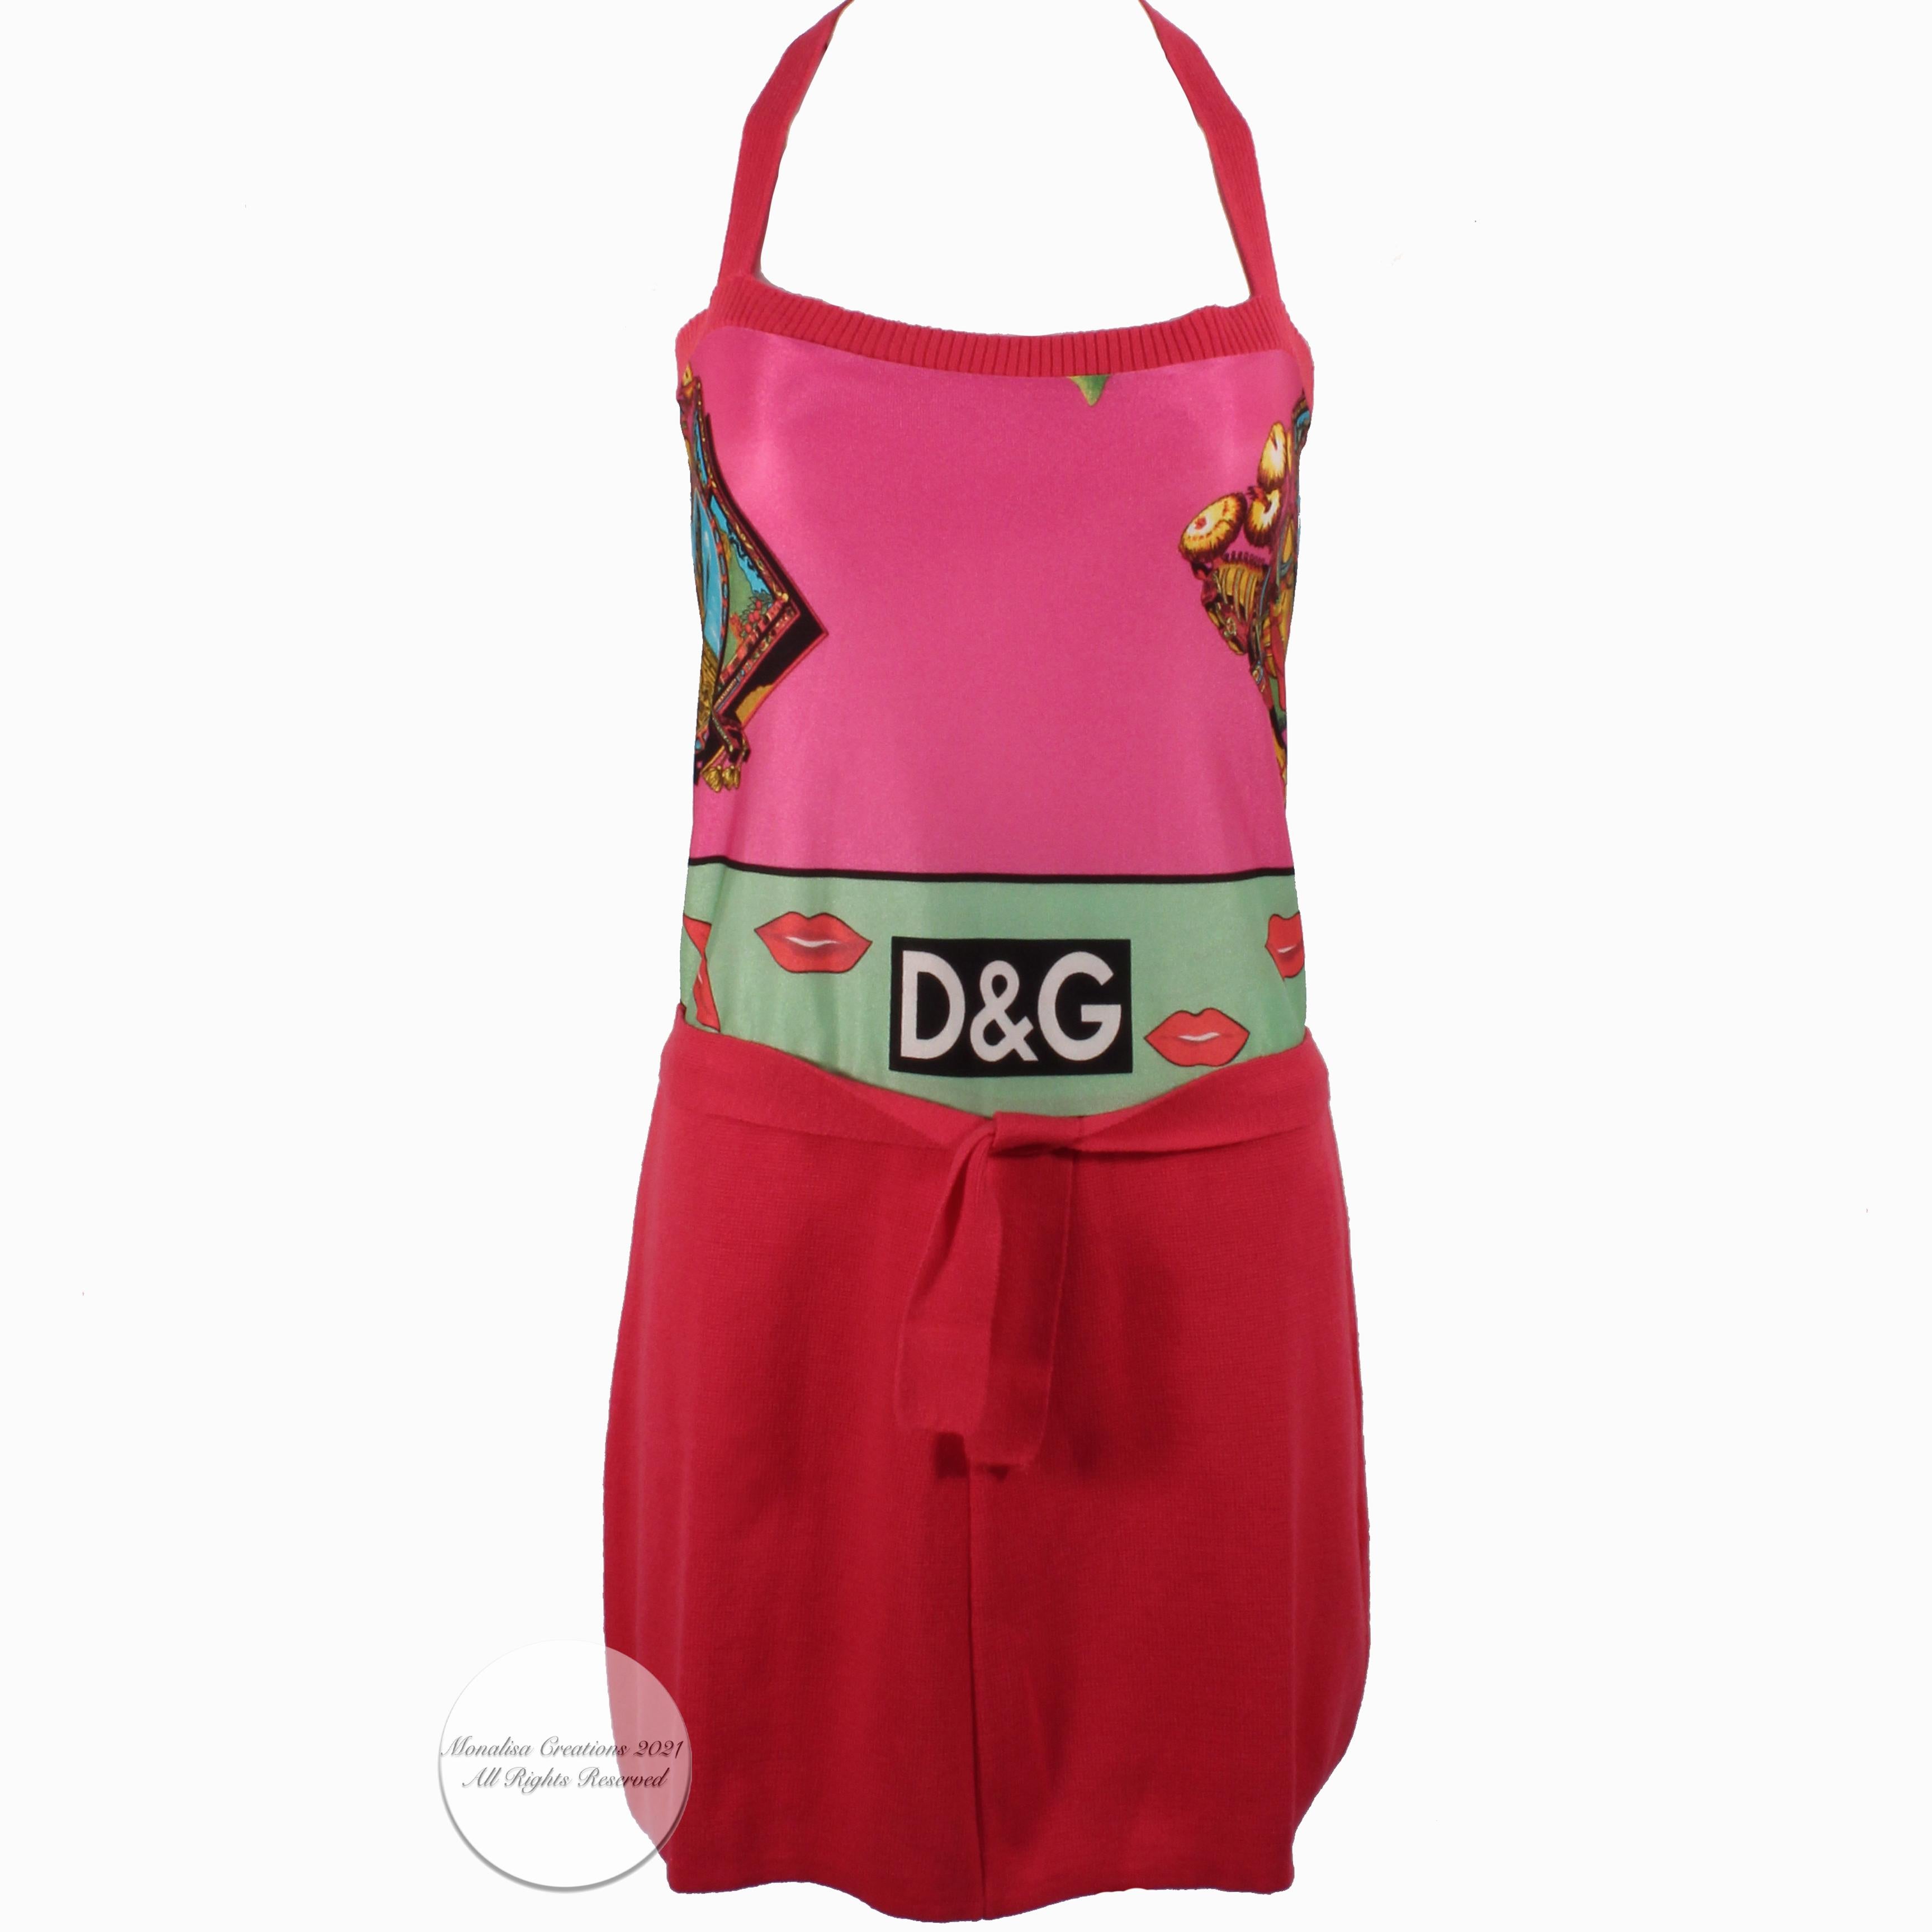 Preowned Dolce and Gabbana satin and knit halter dress, made for their D&G label.  Made from an acrylic satin fabric with graphic print, the ties, skirt and trim are made from a carnation pink cotton knit.  Great little dress that travels well (easy